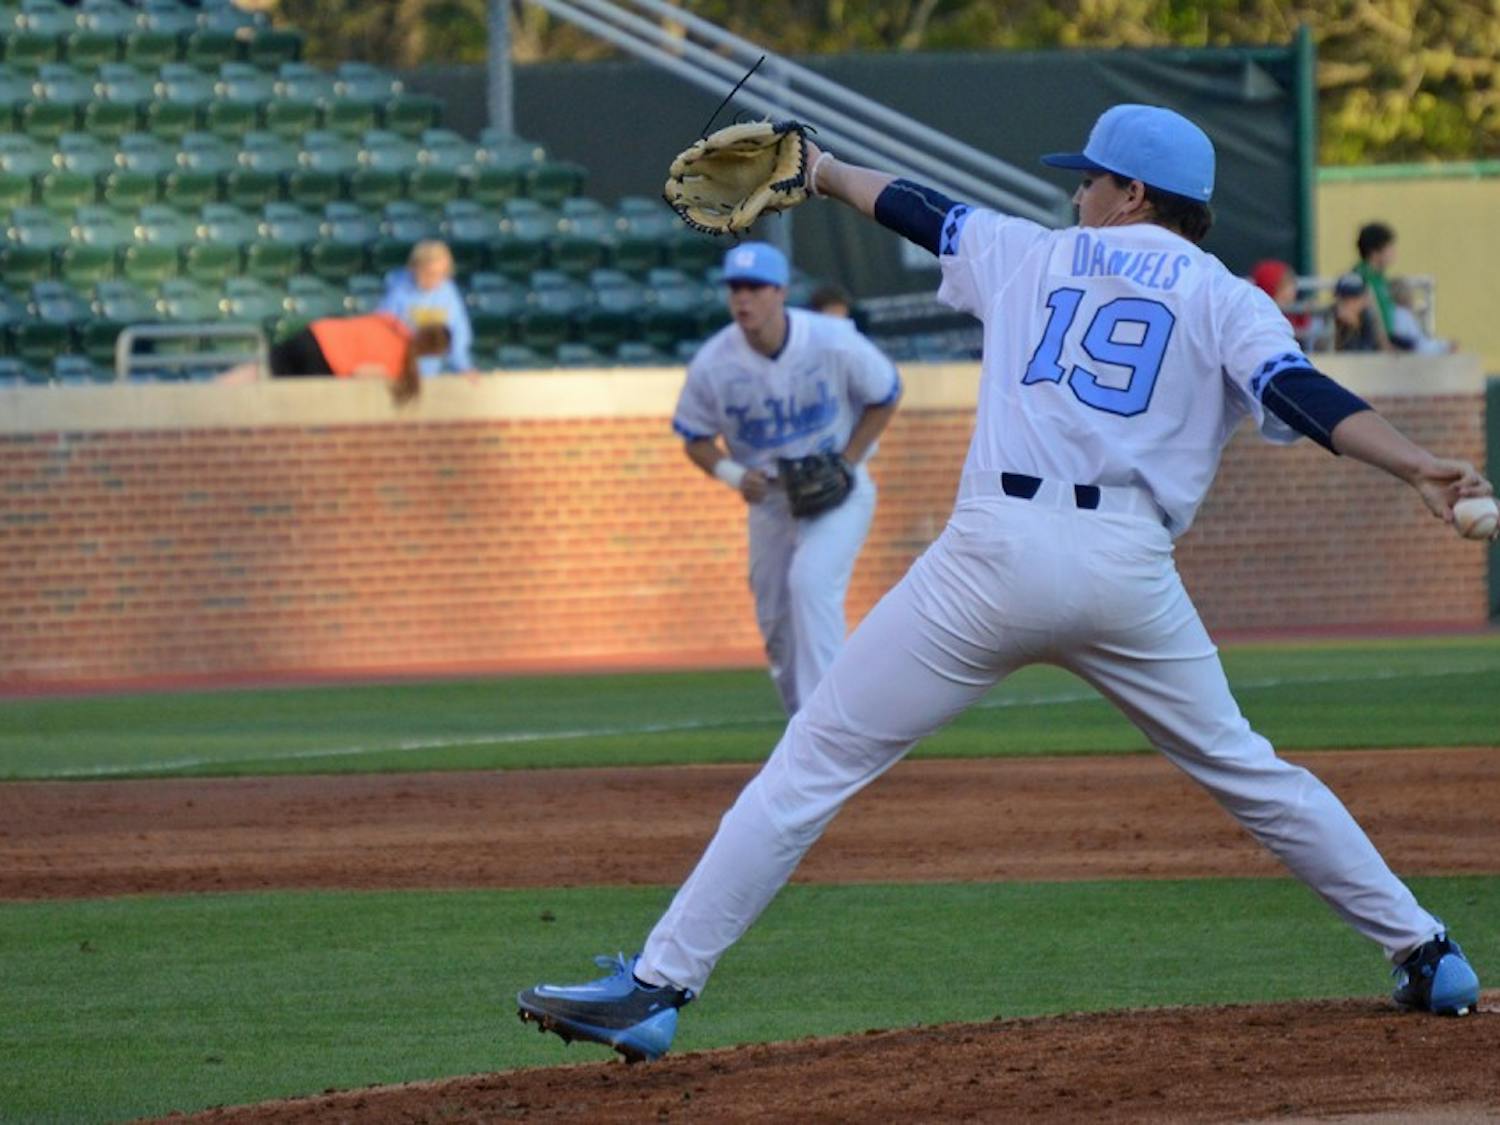 Sophomore Brett Daniels (19) pitches the ball during the game against Davidson College on Tuesday. The Tar Heels won 10-2.